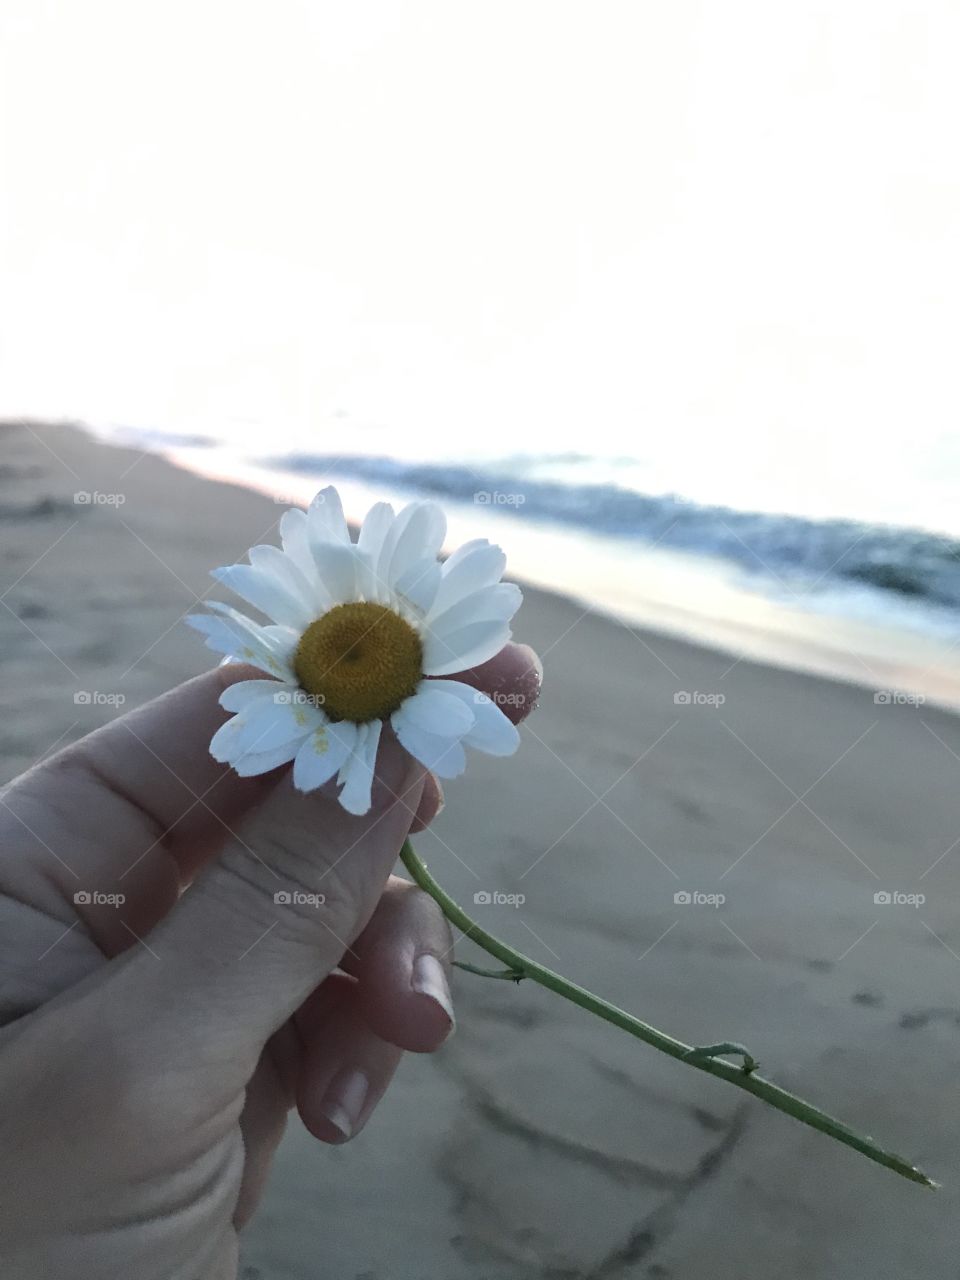 A beautiful daisy being held amongst the crashing waves along the shore of the beach. 